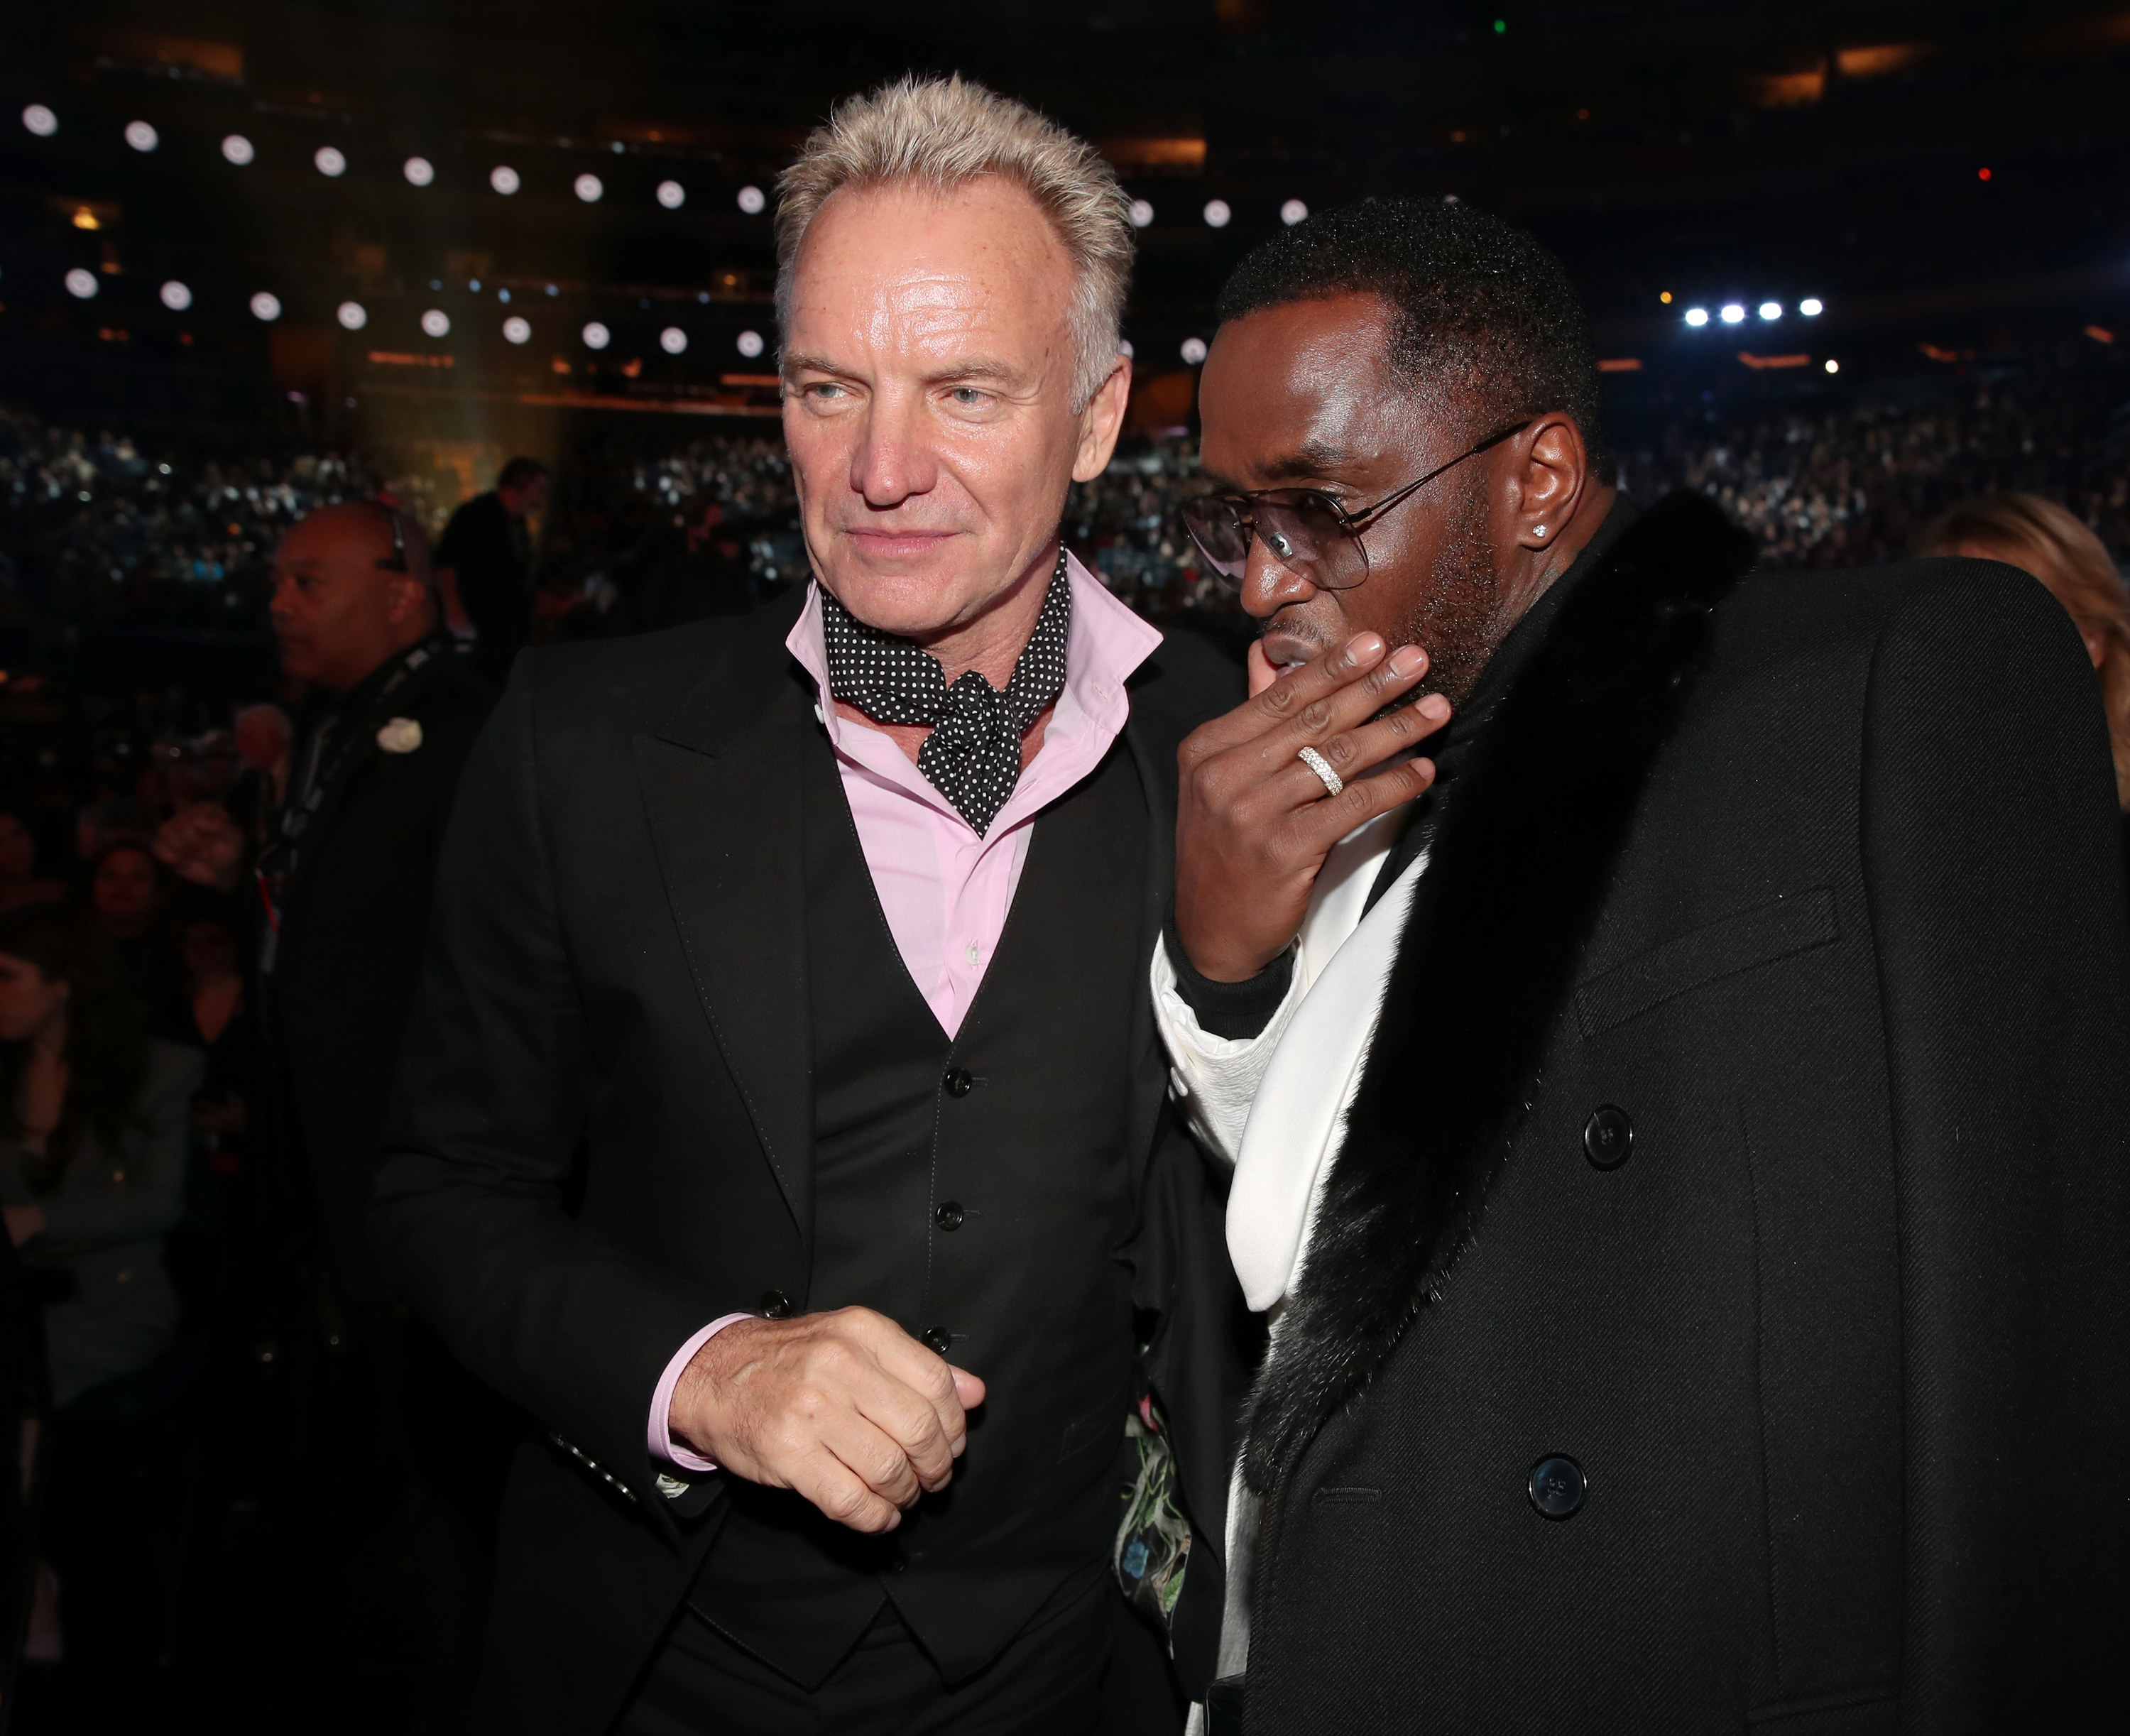 Sting and Diddy standing together